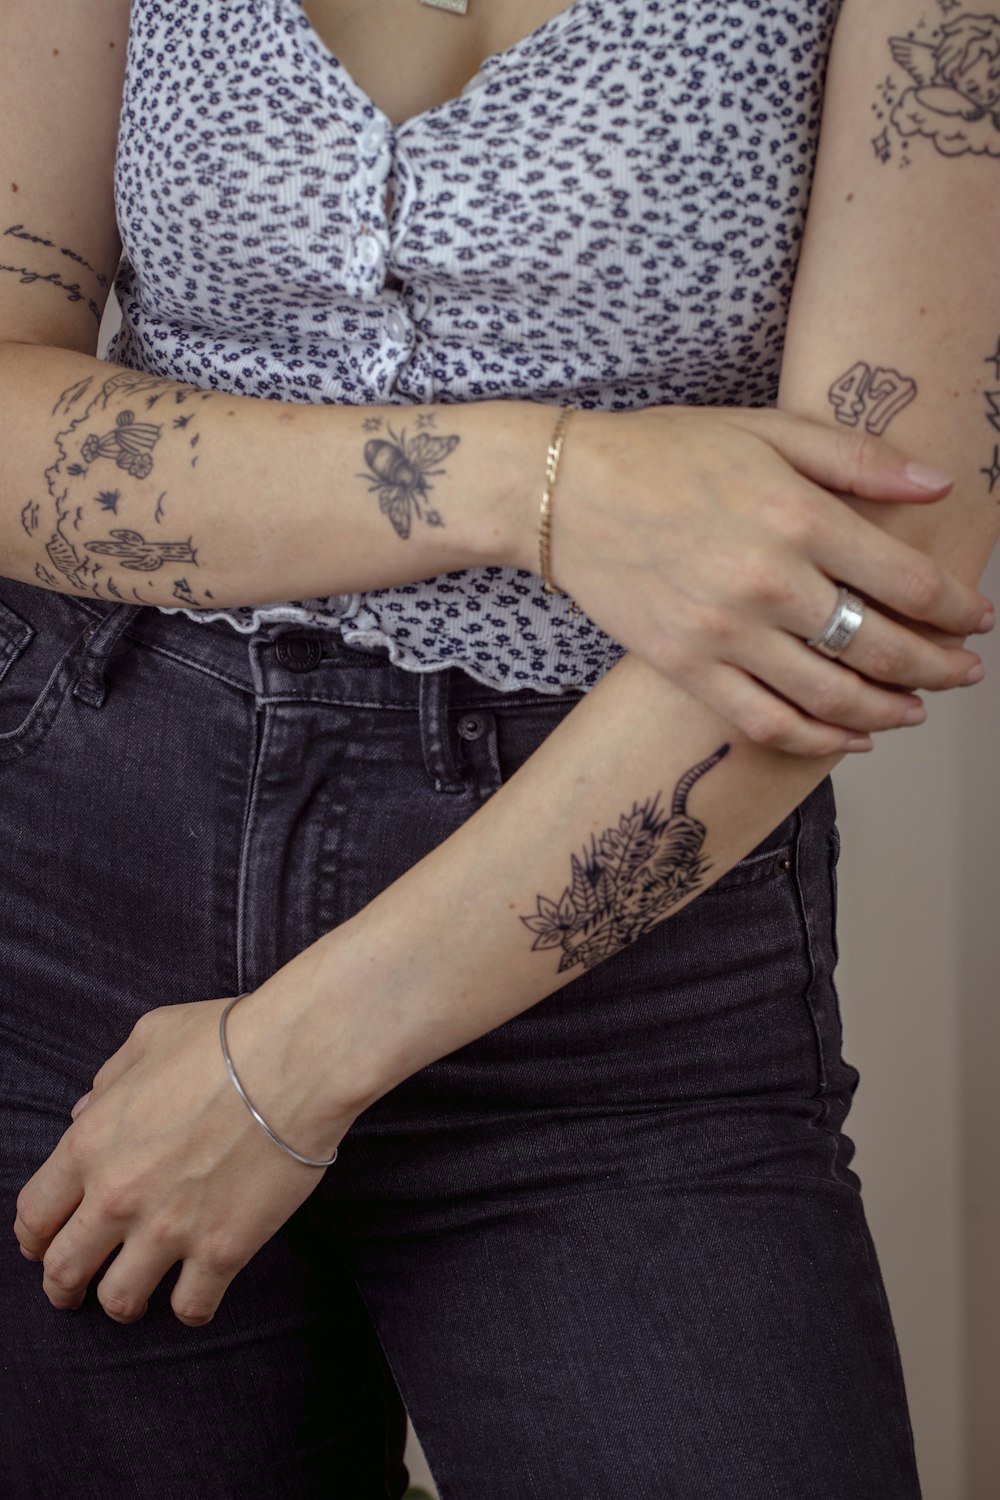 A woman with a tattoo on her arm photo – Free Brown Image on Unsplash